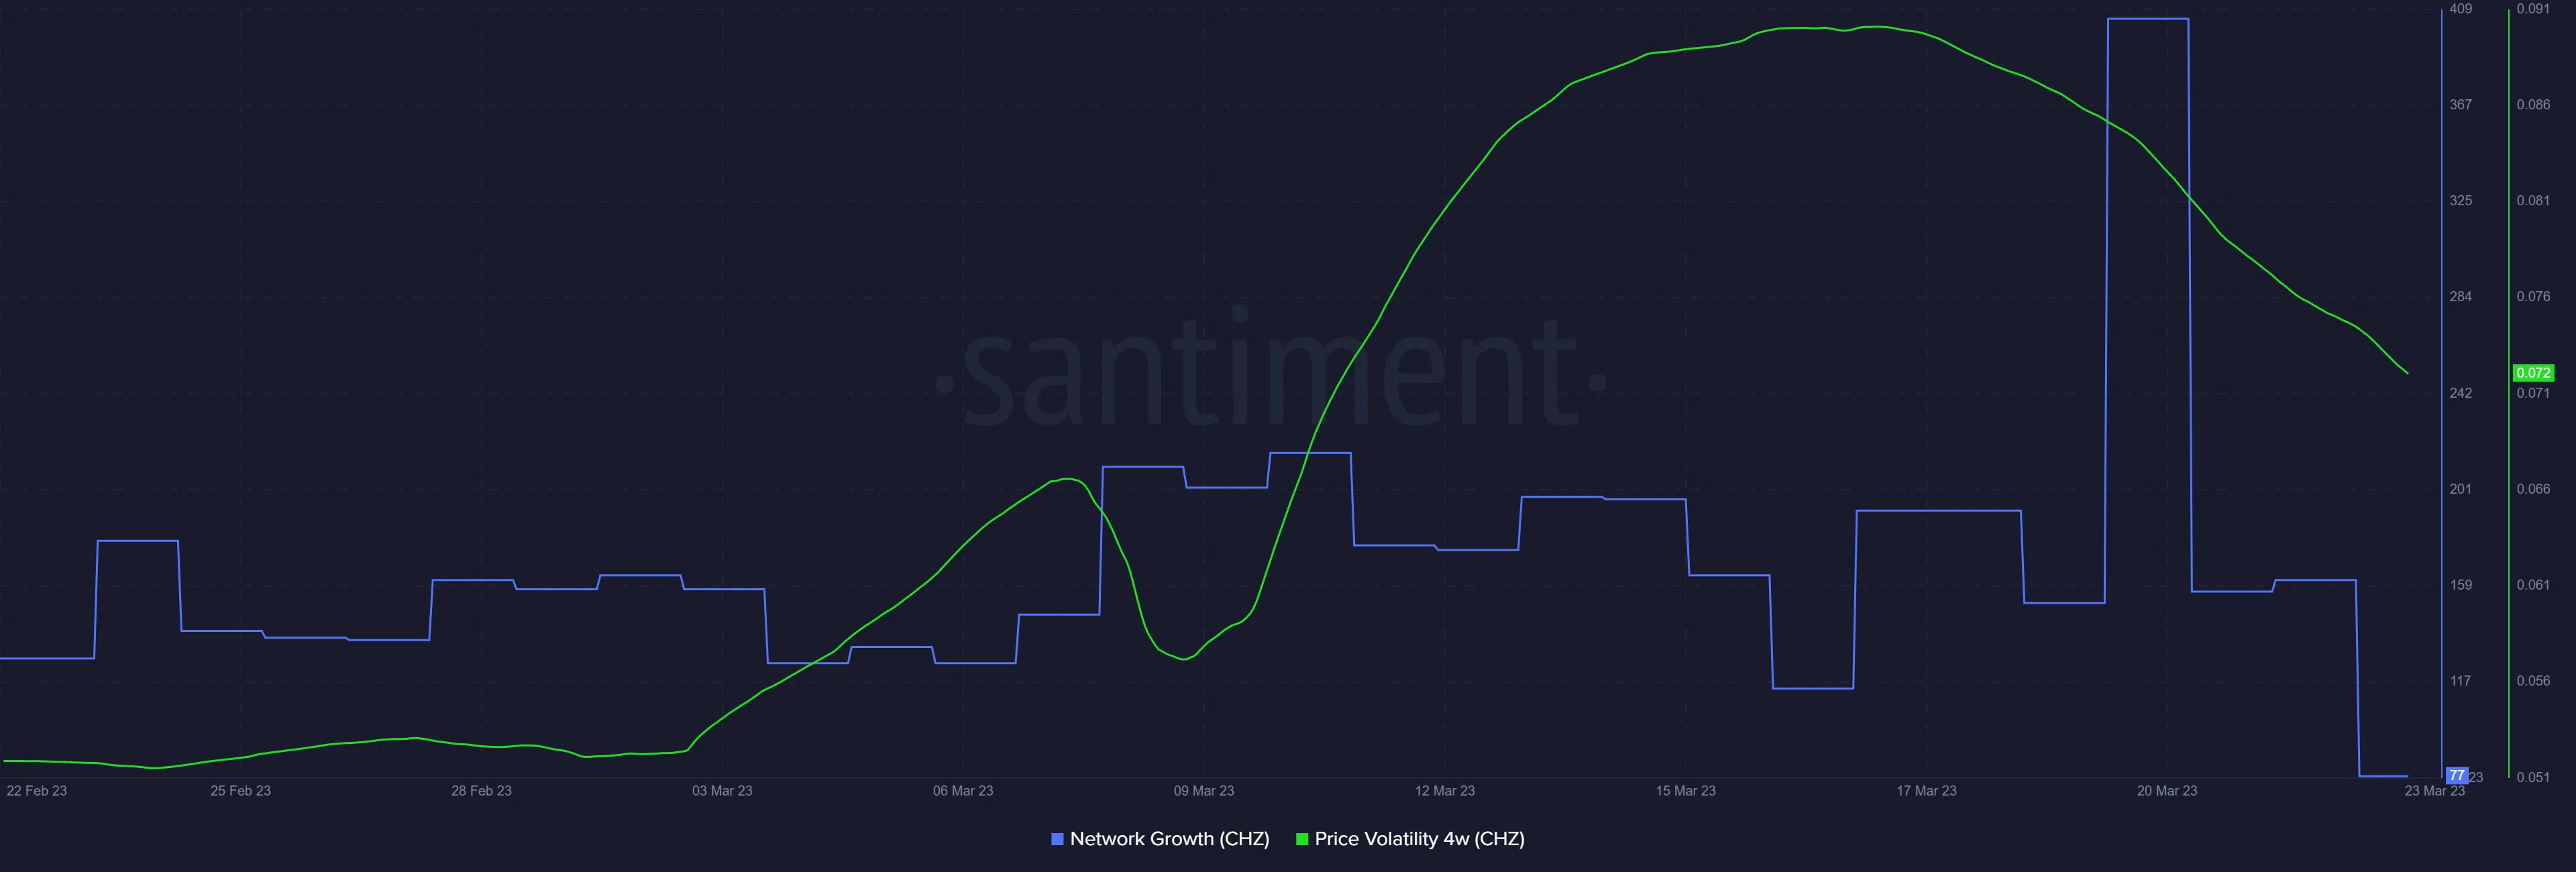 Chiliz CHZ price volatility and network growth and 